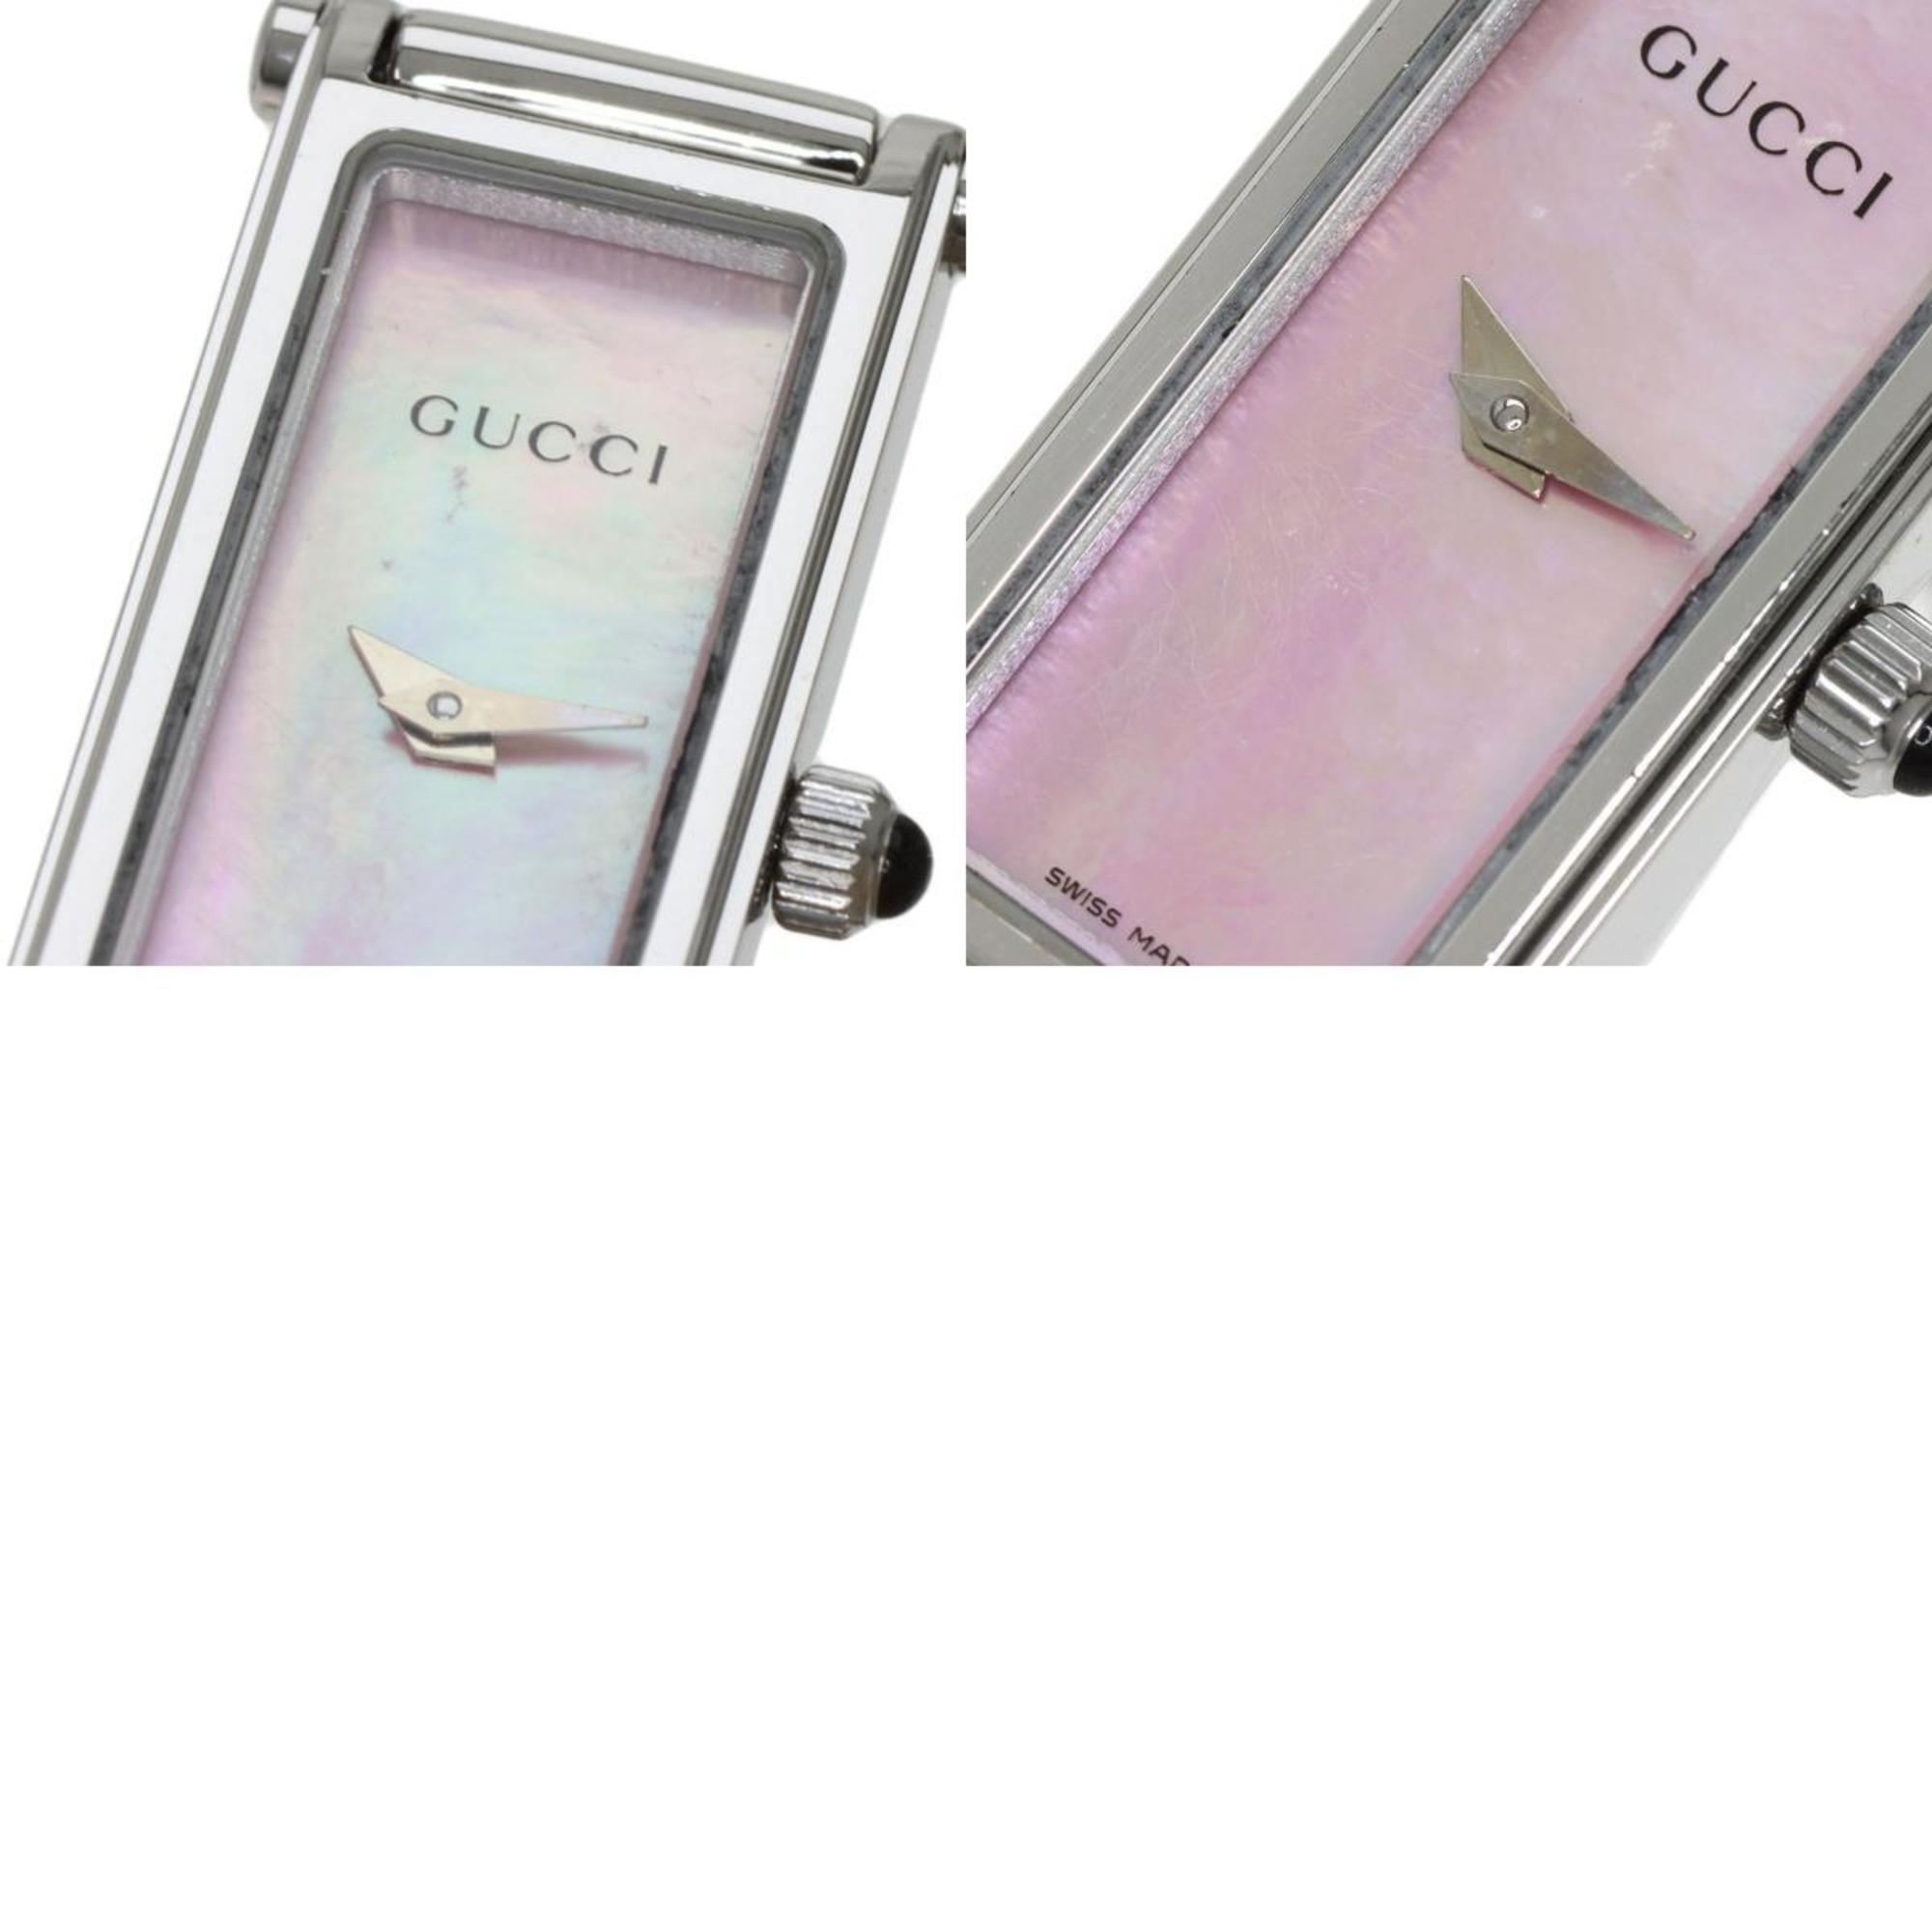 Gucci 1500L Bangle Square Face Watch Stainless Steel SS Ladies GUCCI